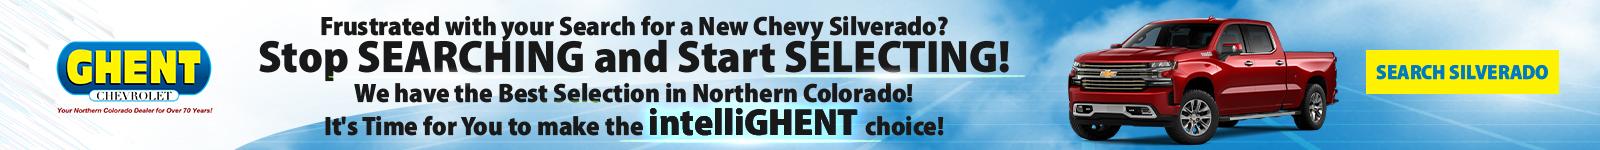 Frustrated in your Search? We have your Truck! Best Selection in Colorado. Make the intelliGHENT choice! Stop your Search and Start Your Selection!